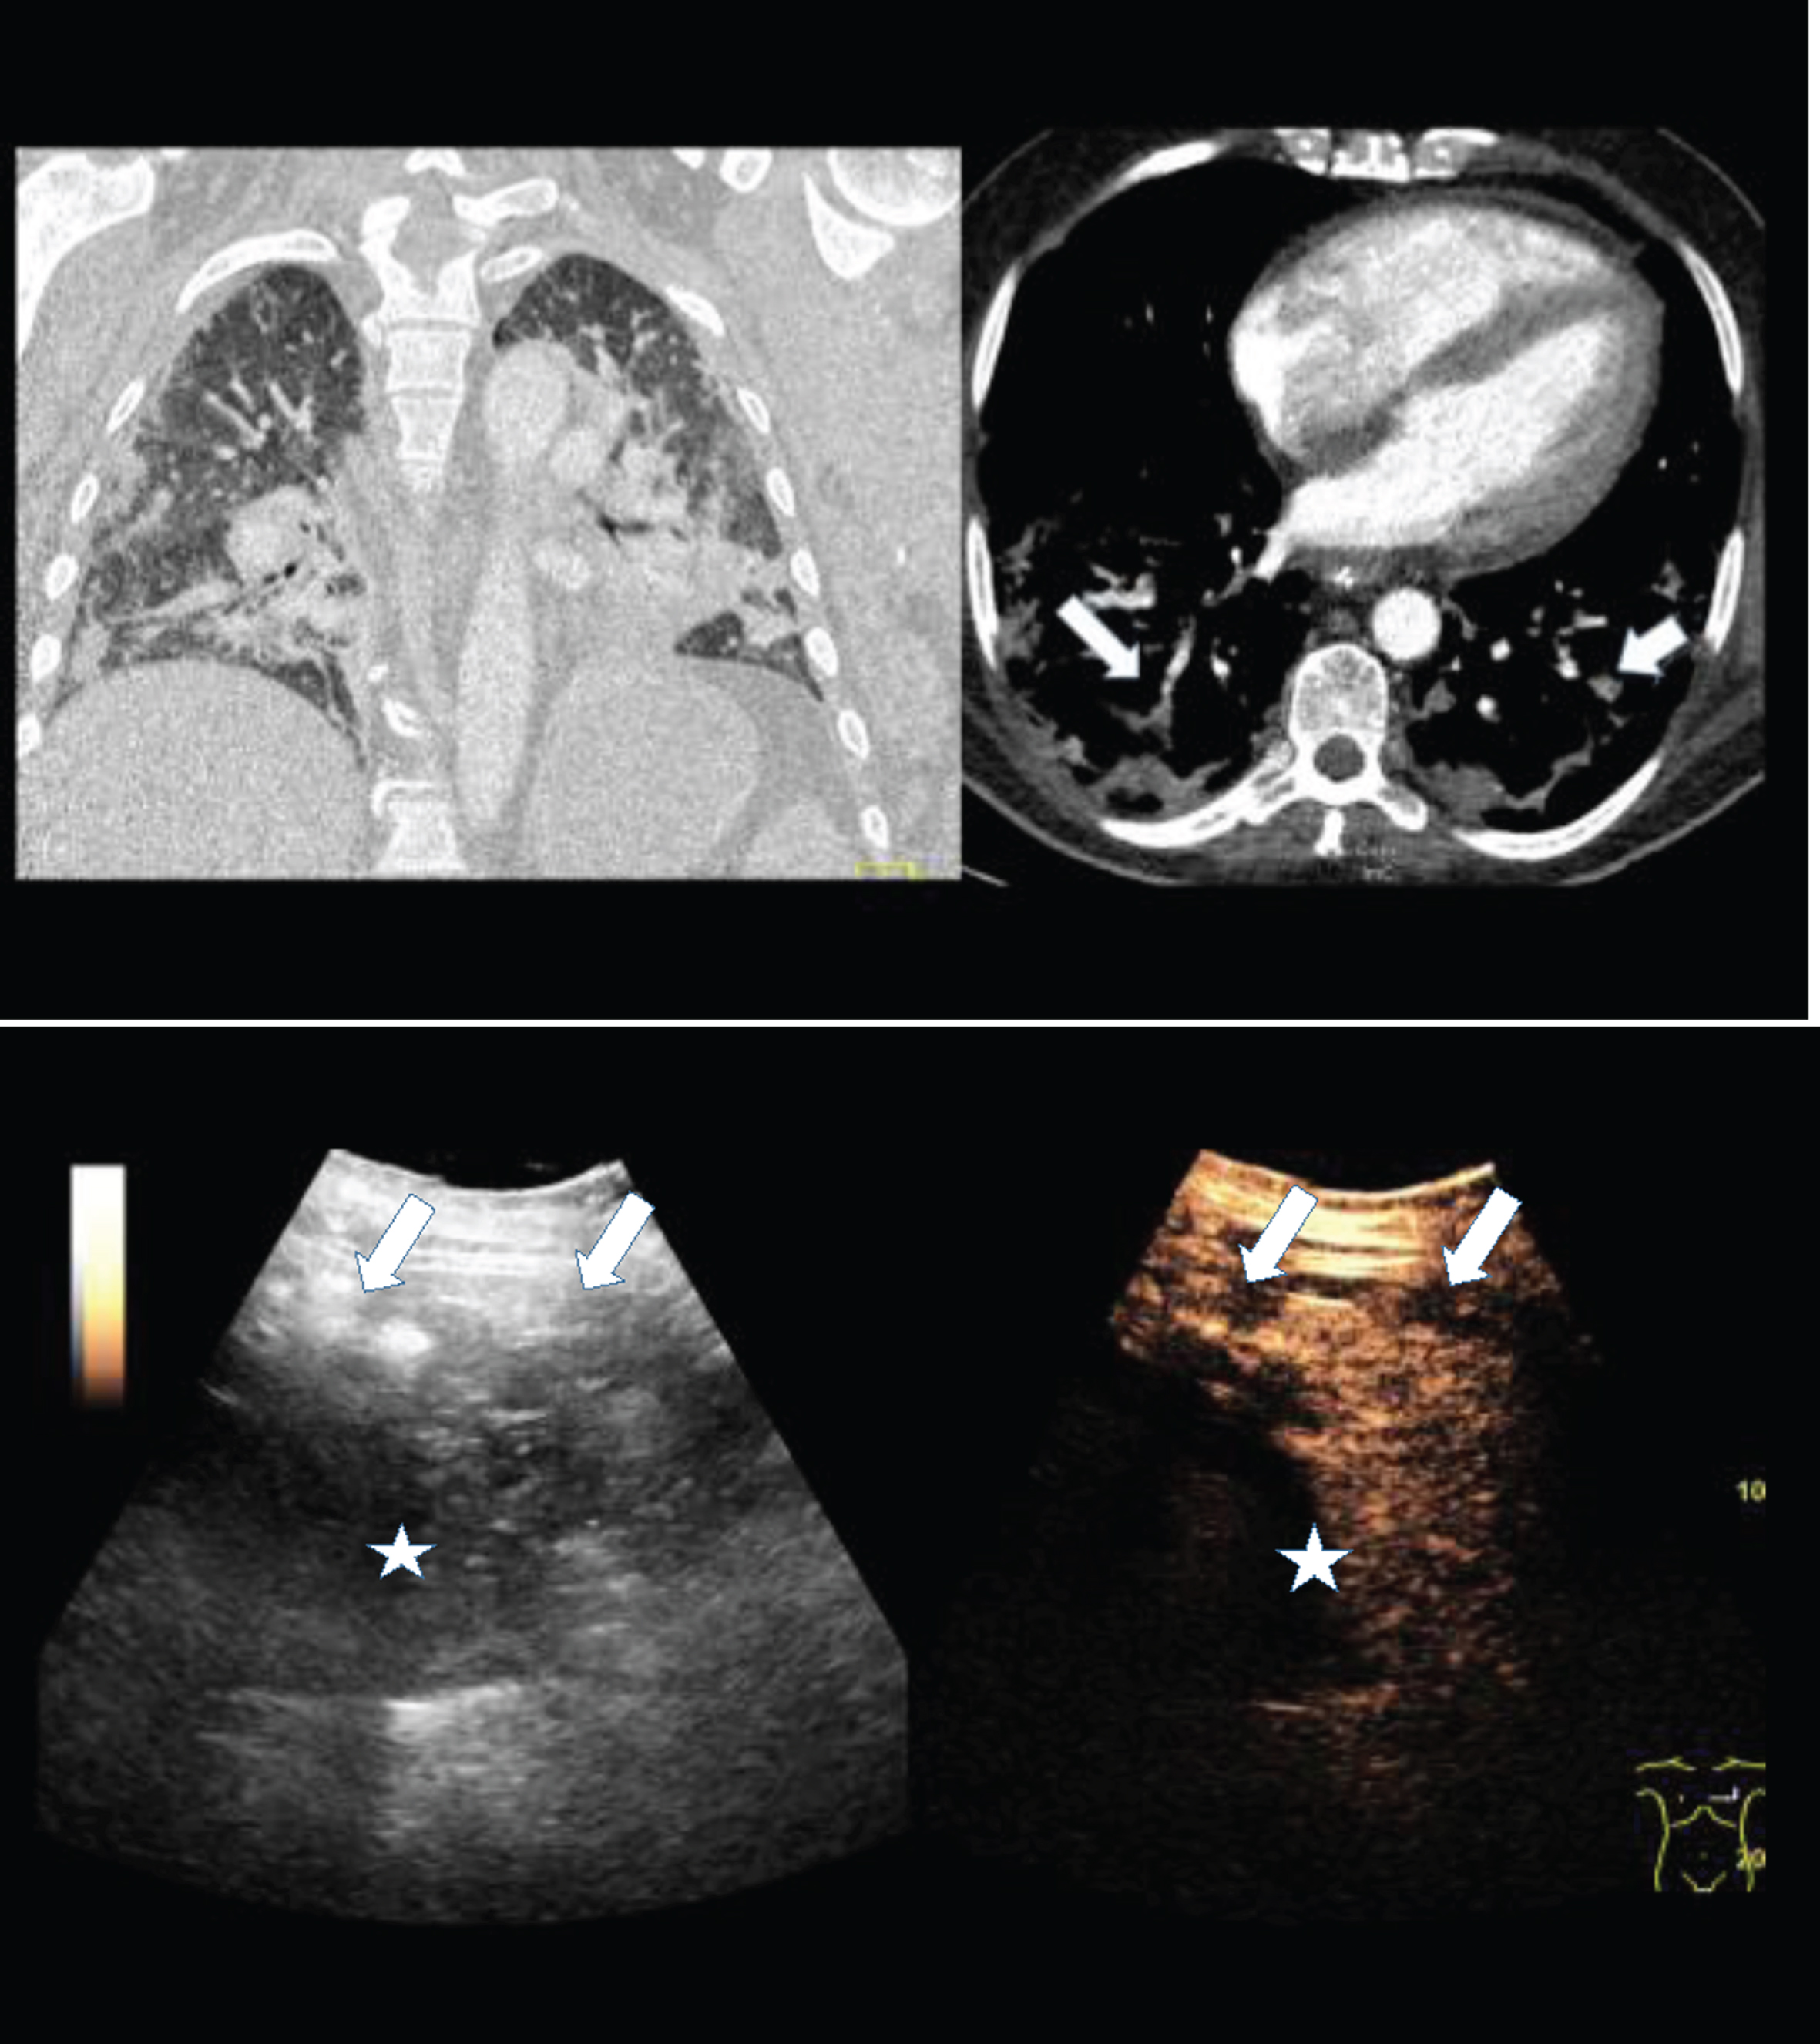 2A: Contrast enhanced computed tomography (CT) of a 56 years old female COVID-19 patient with pulmonary arterial embolism of the right lung (arrow) and consolidation on both sides. Documentation with two different windows for vascular structures and lung parenchymal changes.